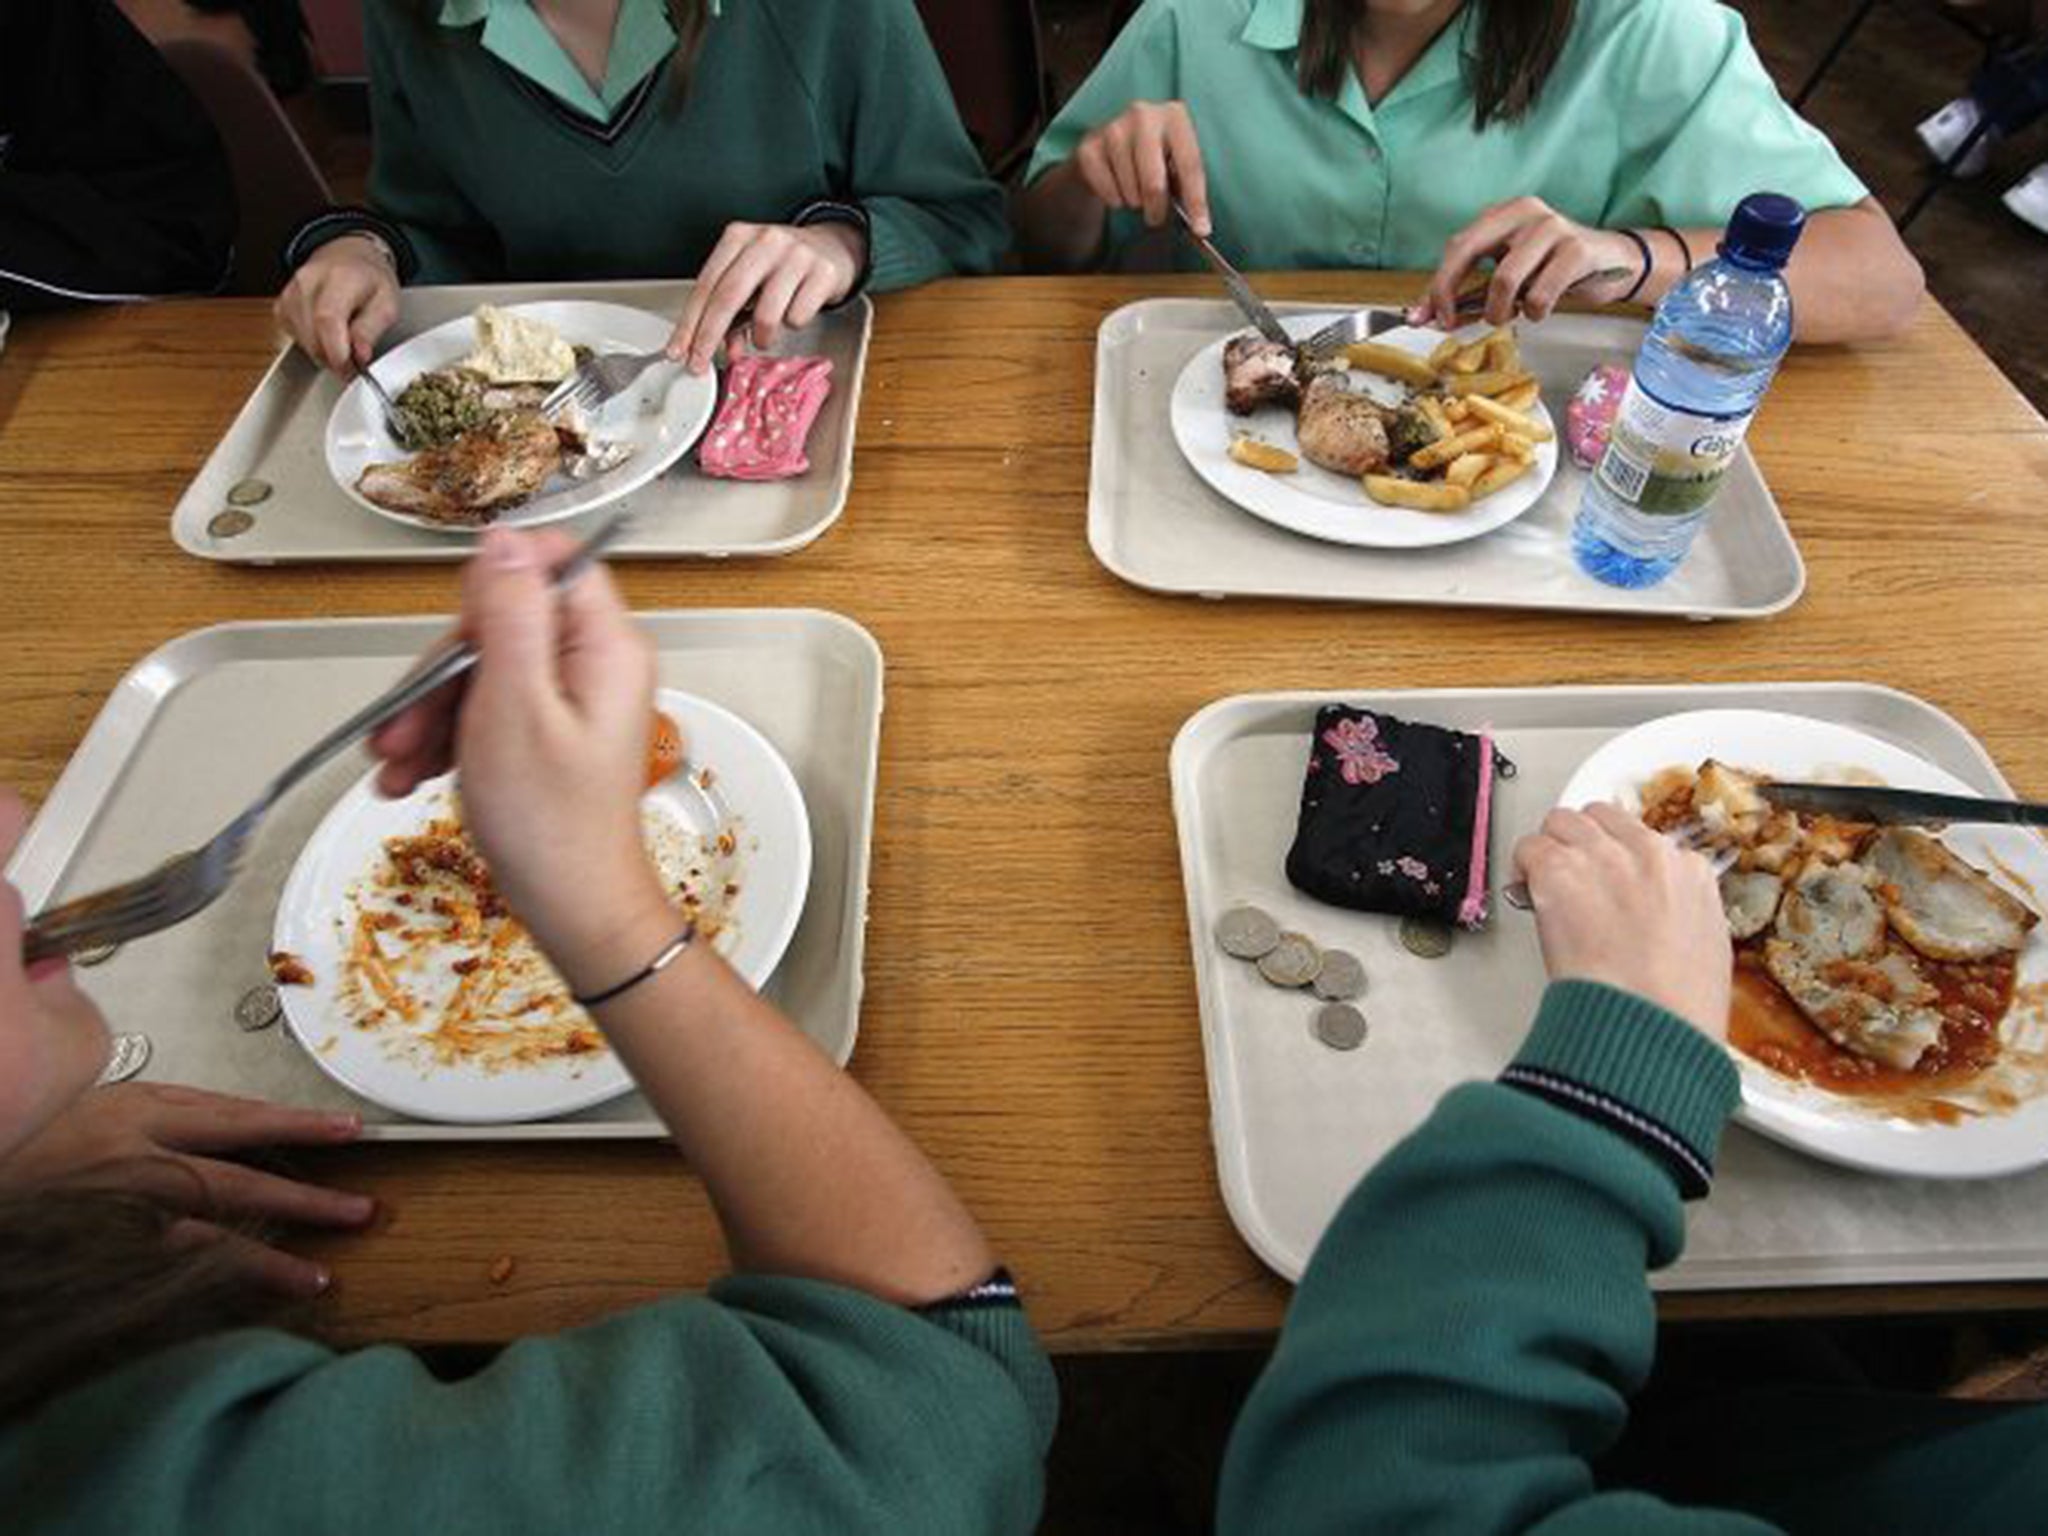 School meals are one area where the UK’s food waste can be reduced